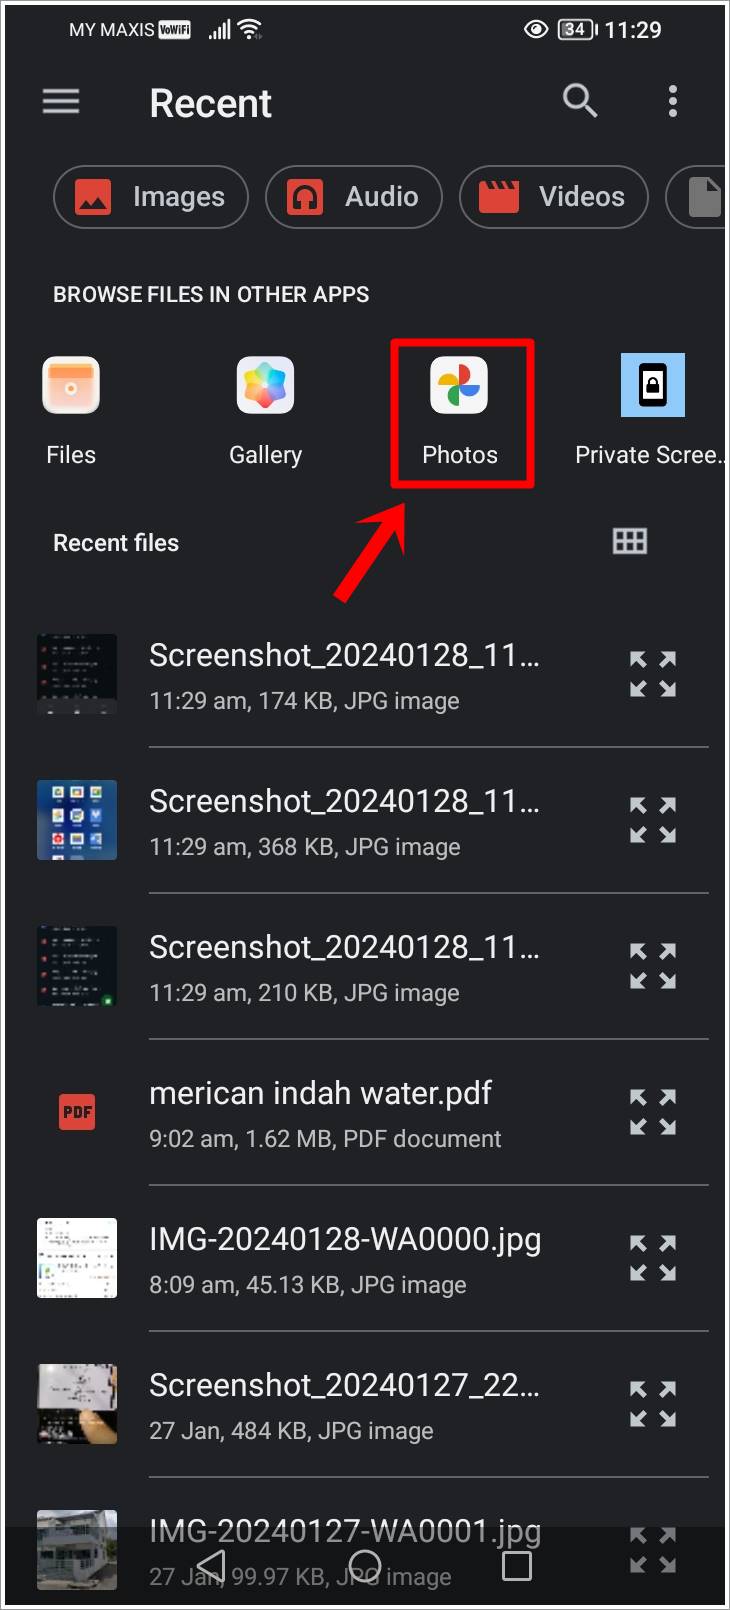 This is a screenshot of the 'Recent Uploaded Files' page of an Android phone. The 'Google Photos' icon is highlighted.